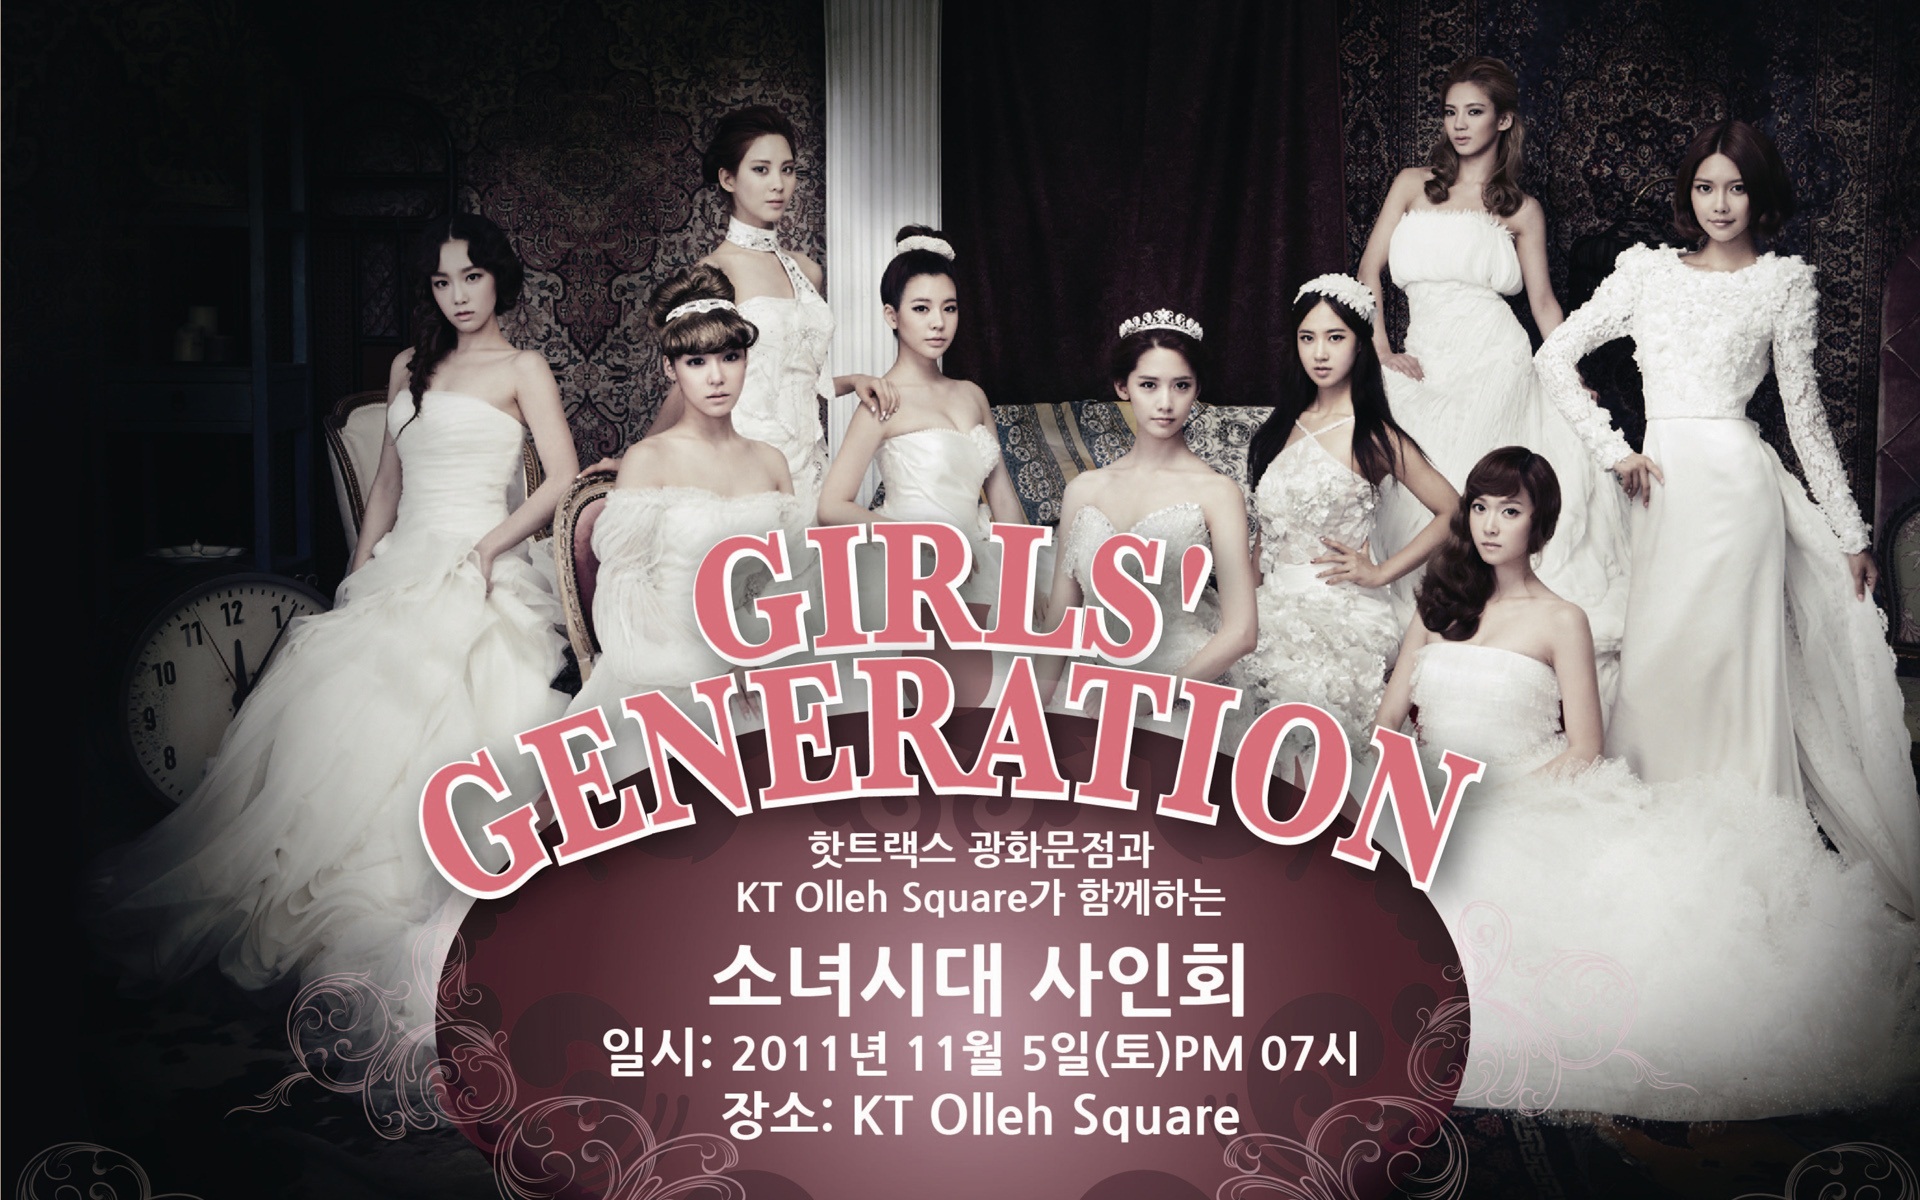 Girls Generation latest HD wallpapers collection #8 - 1920x1200